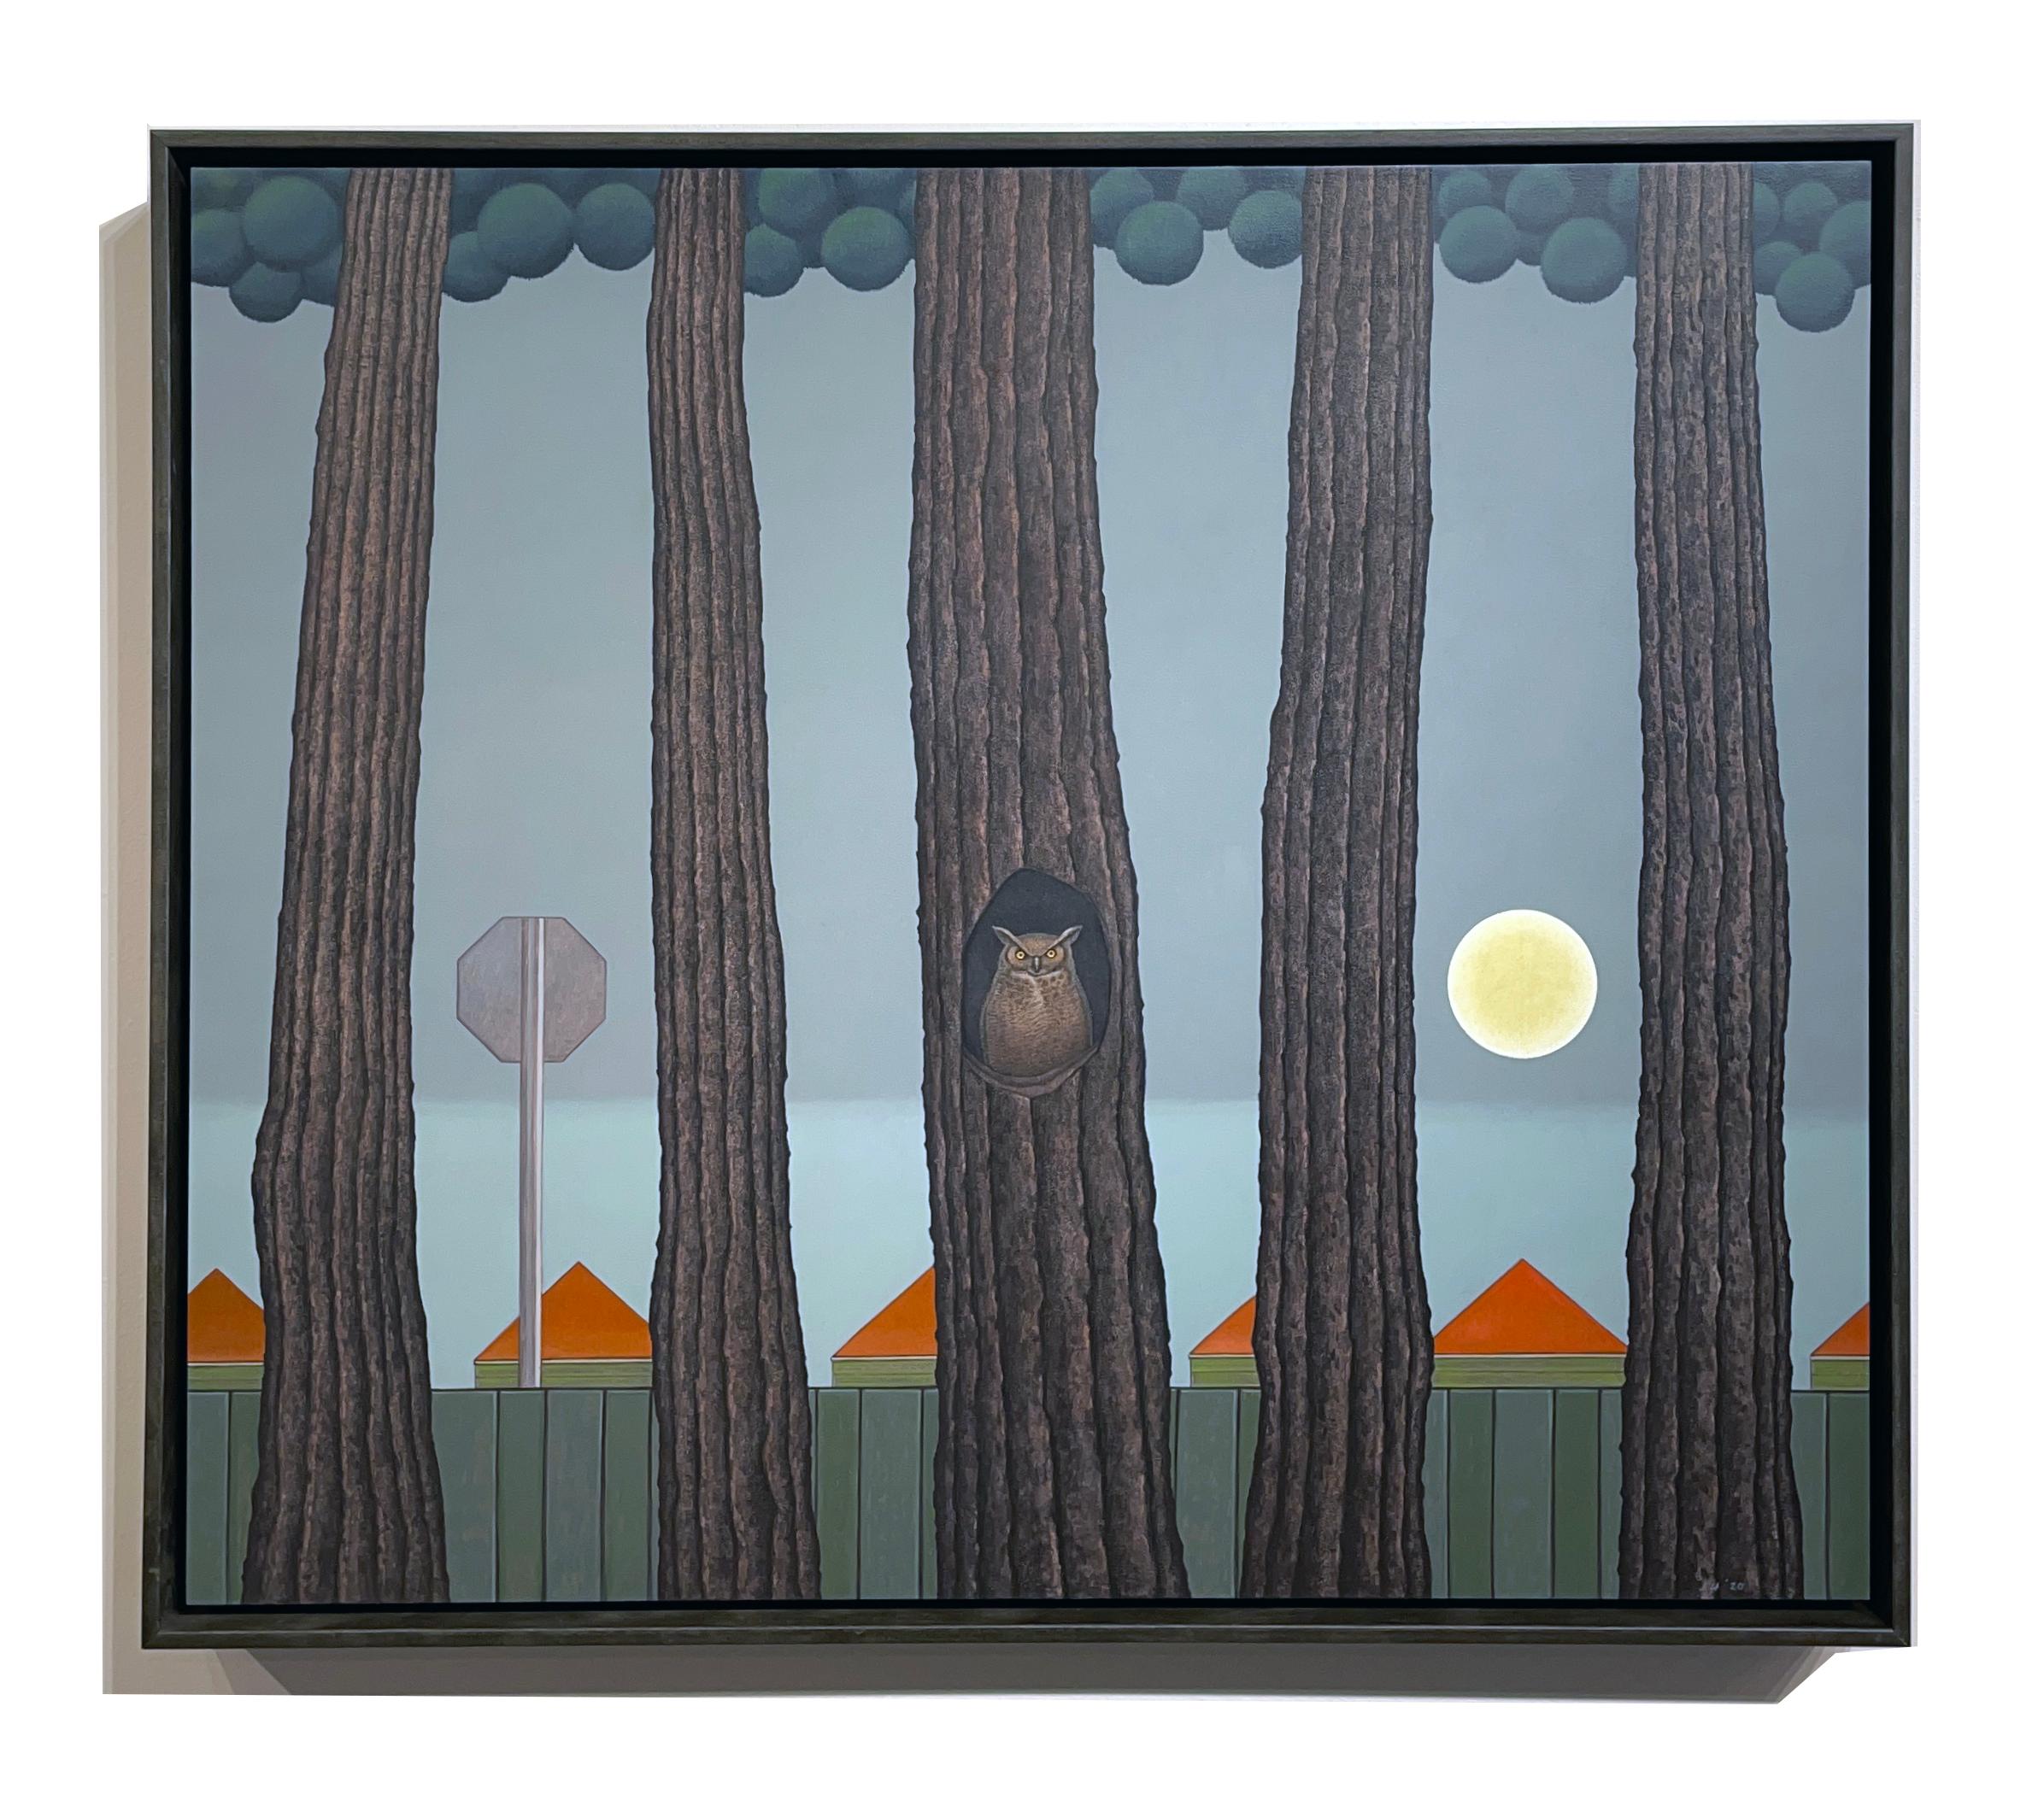 Rising -  Surreal Landscape with Row of Trees and Owl, Oil on Panel For Sale 2